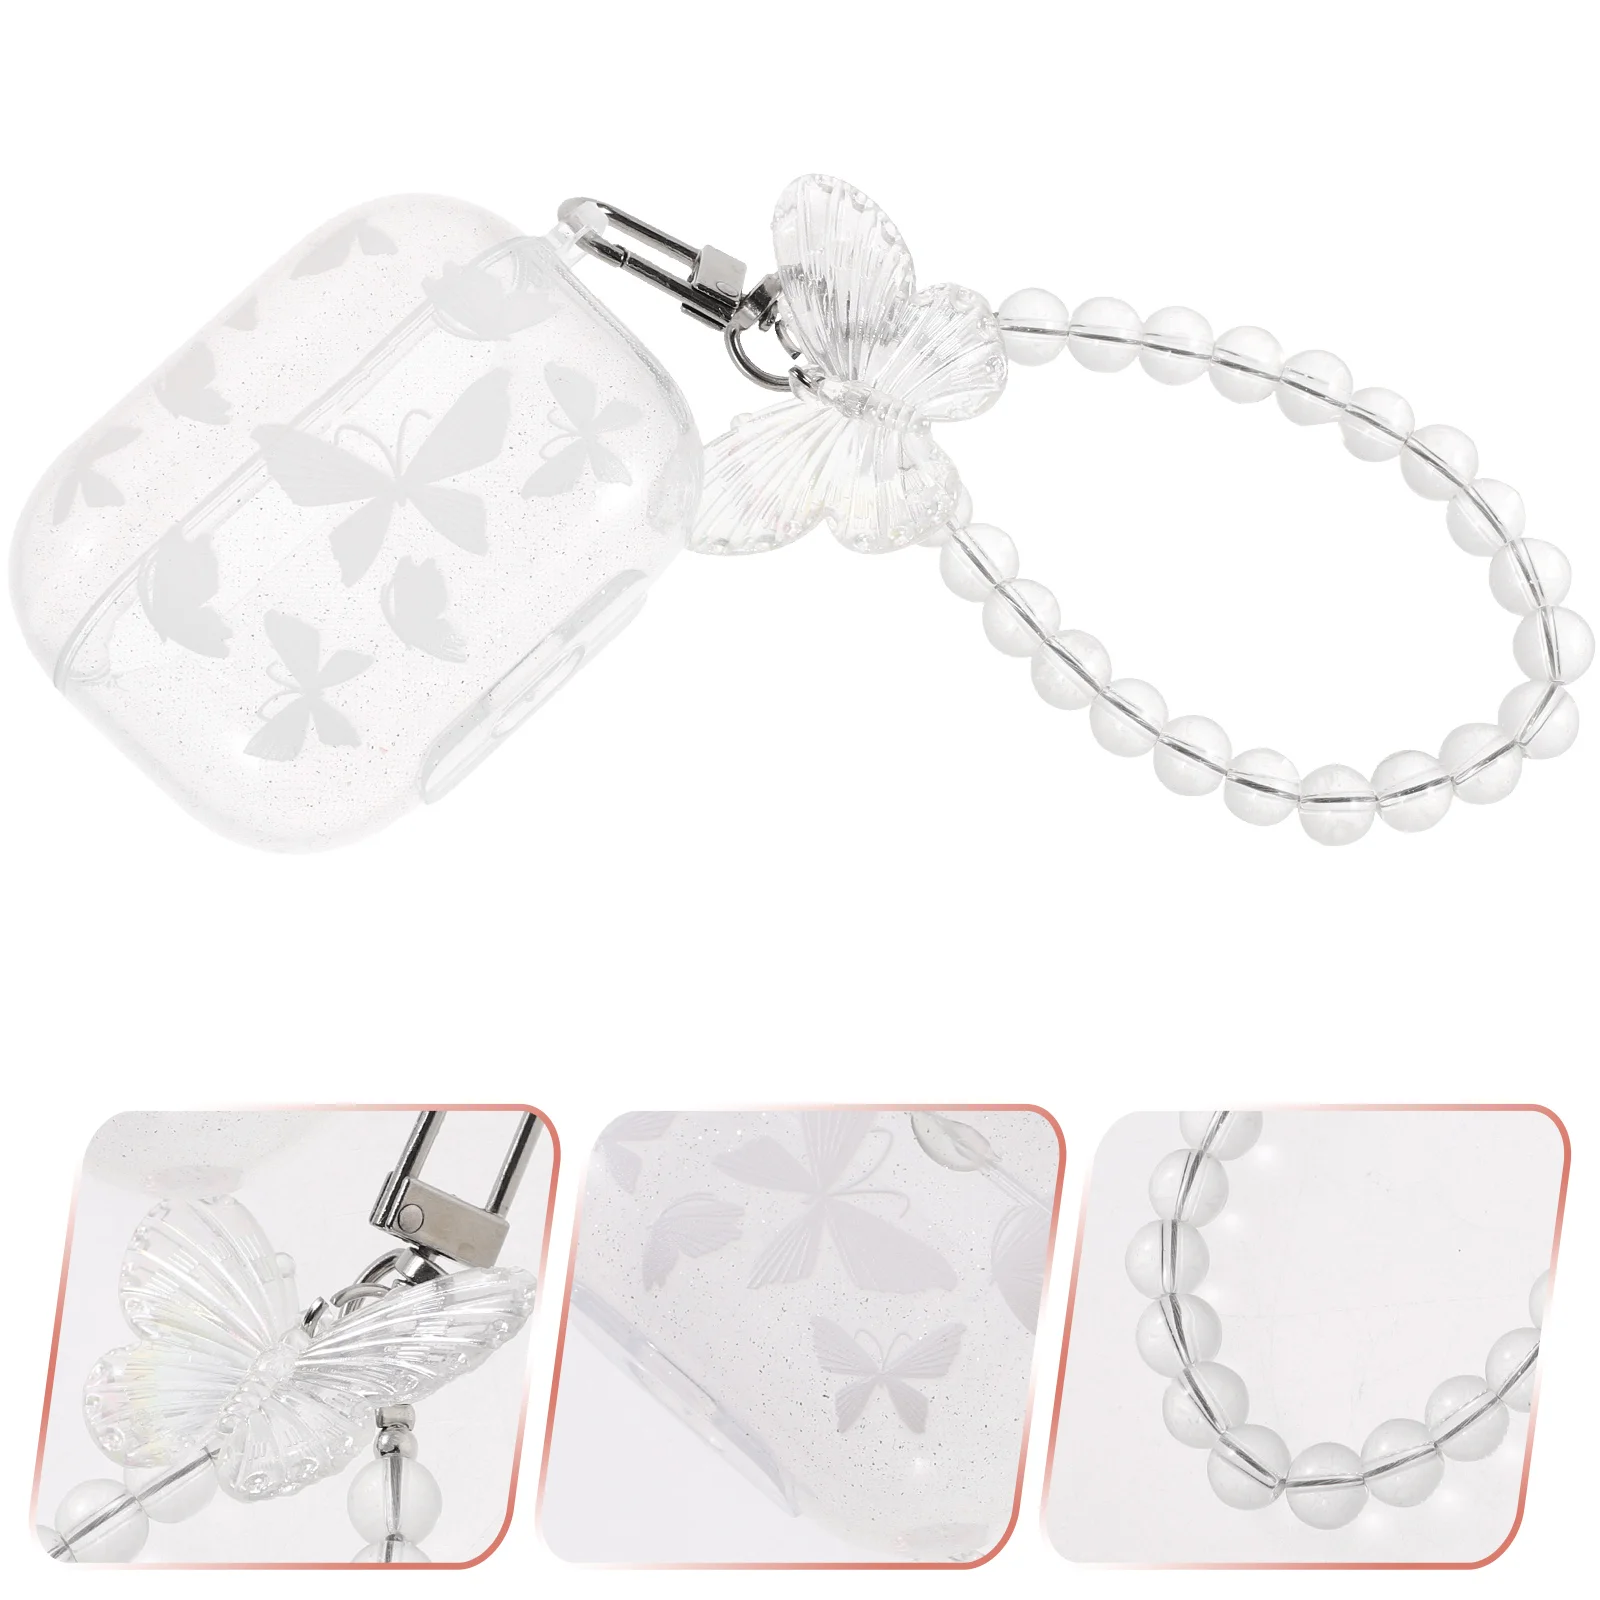 

Earphone Case Cover Sleeve Headphone Earbuds Cases Protector Delicate Shell Decorative Earbud Portable Ear Tpu Protective